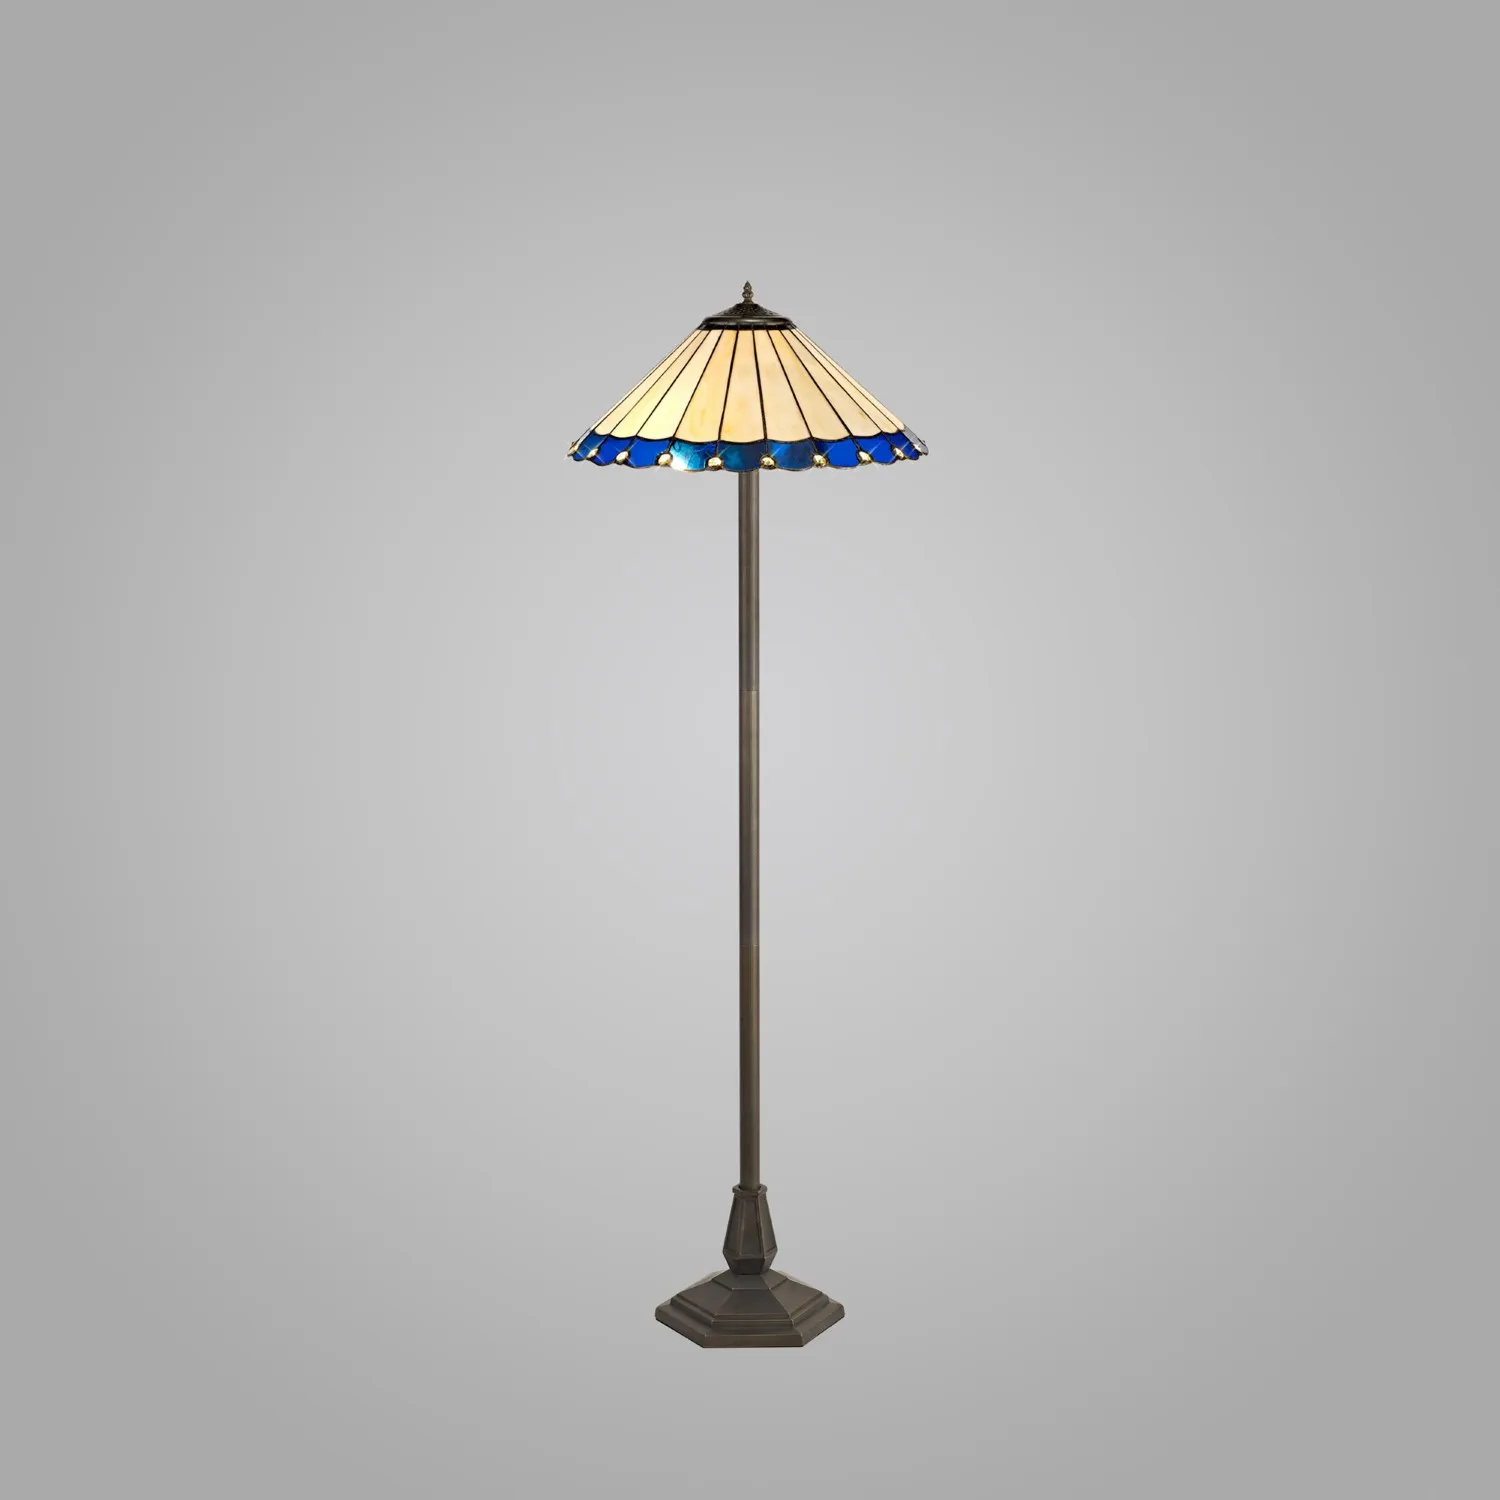 Ware 2 Light Octagonal Floor Lamp E27 With 40cm Tiffany Shade, Blue Cream Crystal Aged Antique Brass